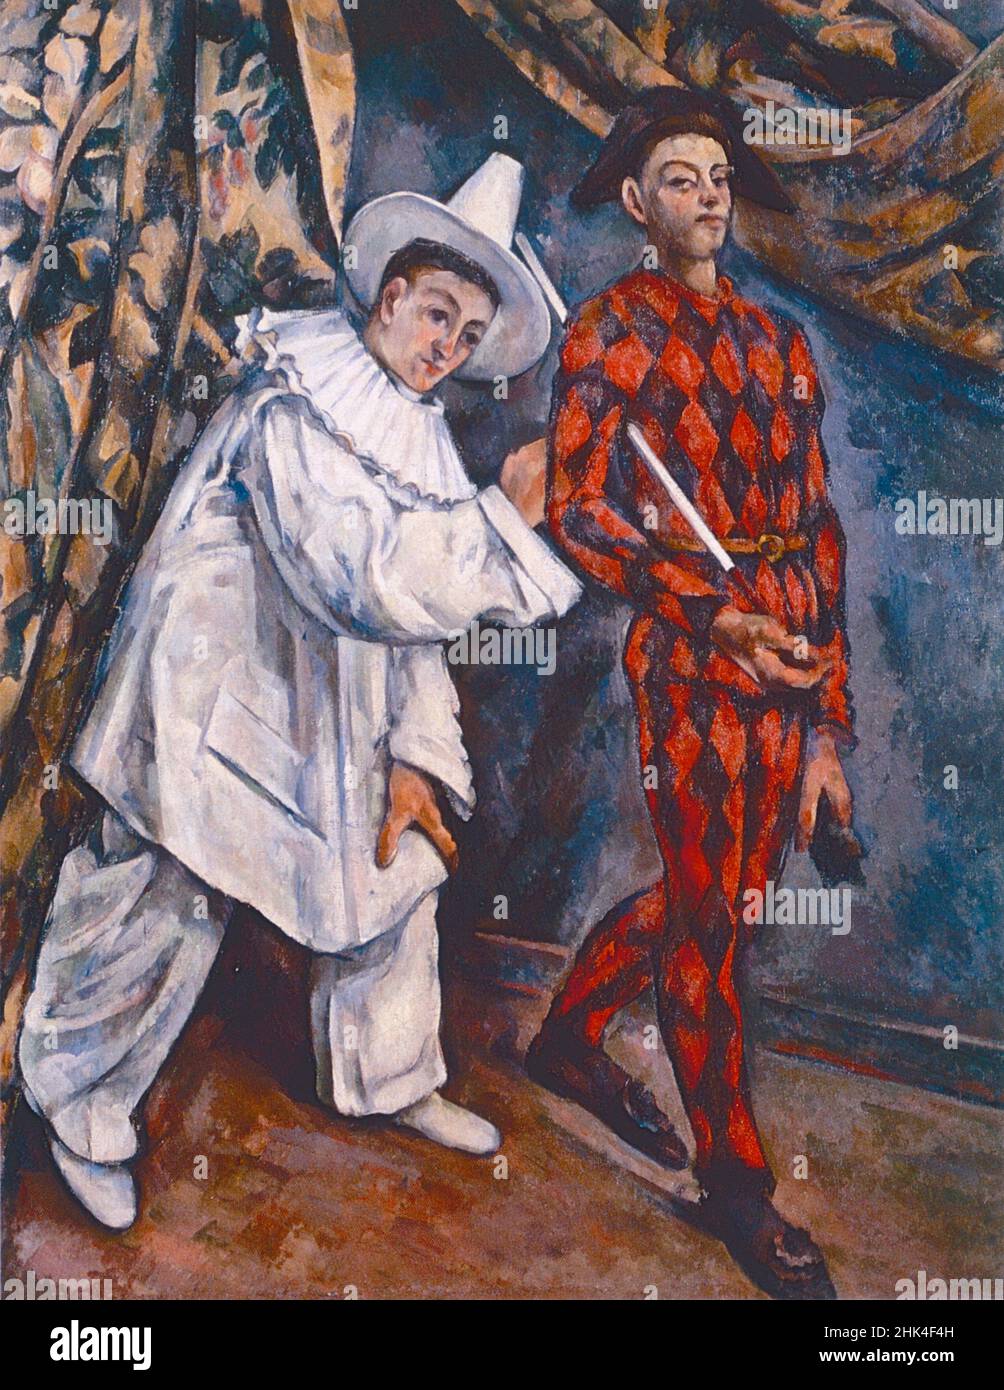 Pierrot and Harlequin, painting by French artist Paul Cezanne, 1898 Stock Photo